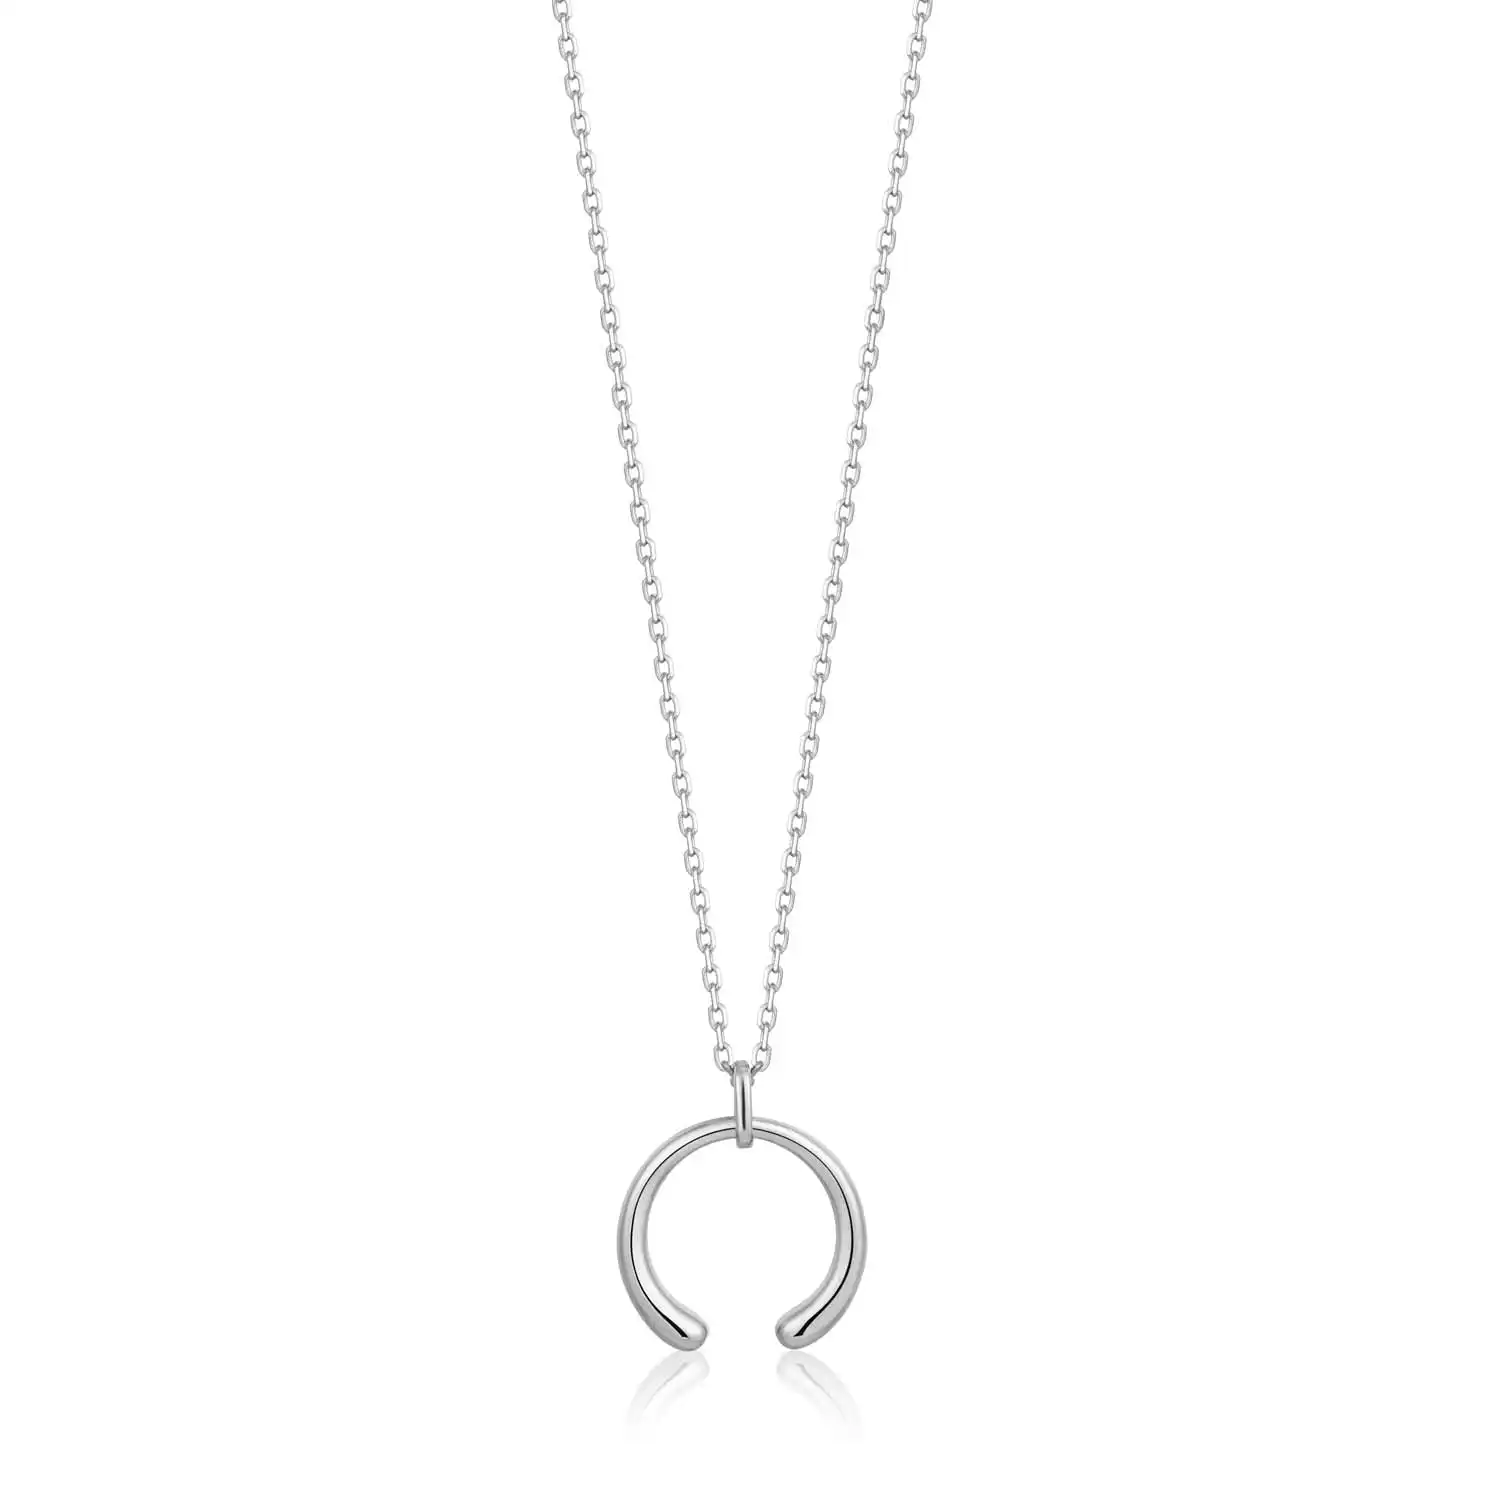 Ania Haie Luxe Curve Necklace - Silver